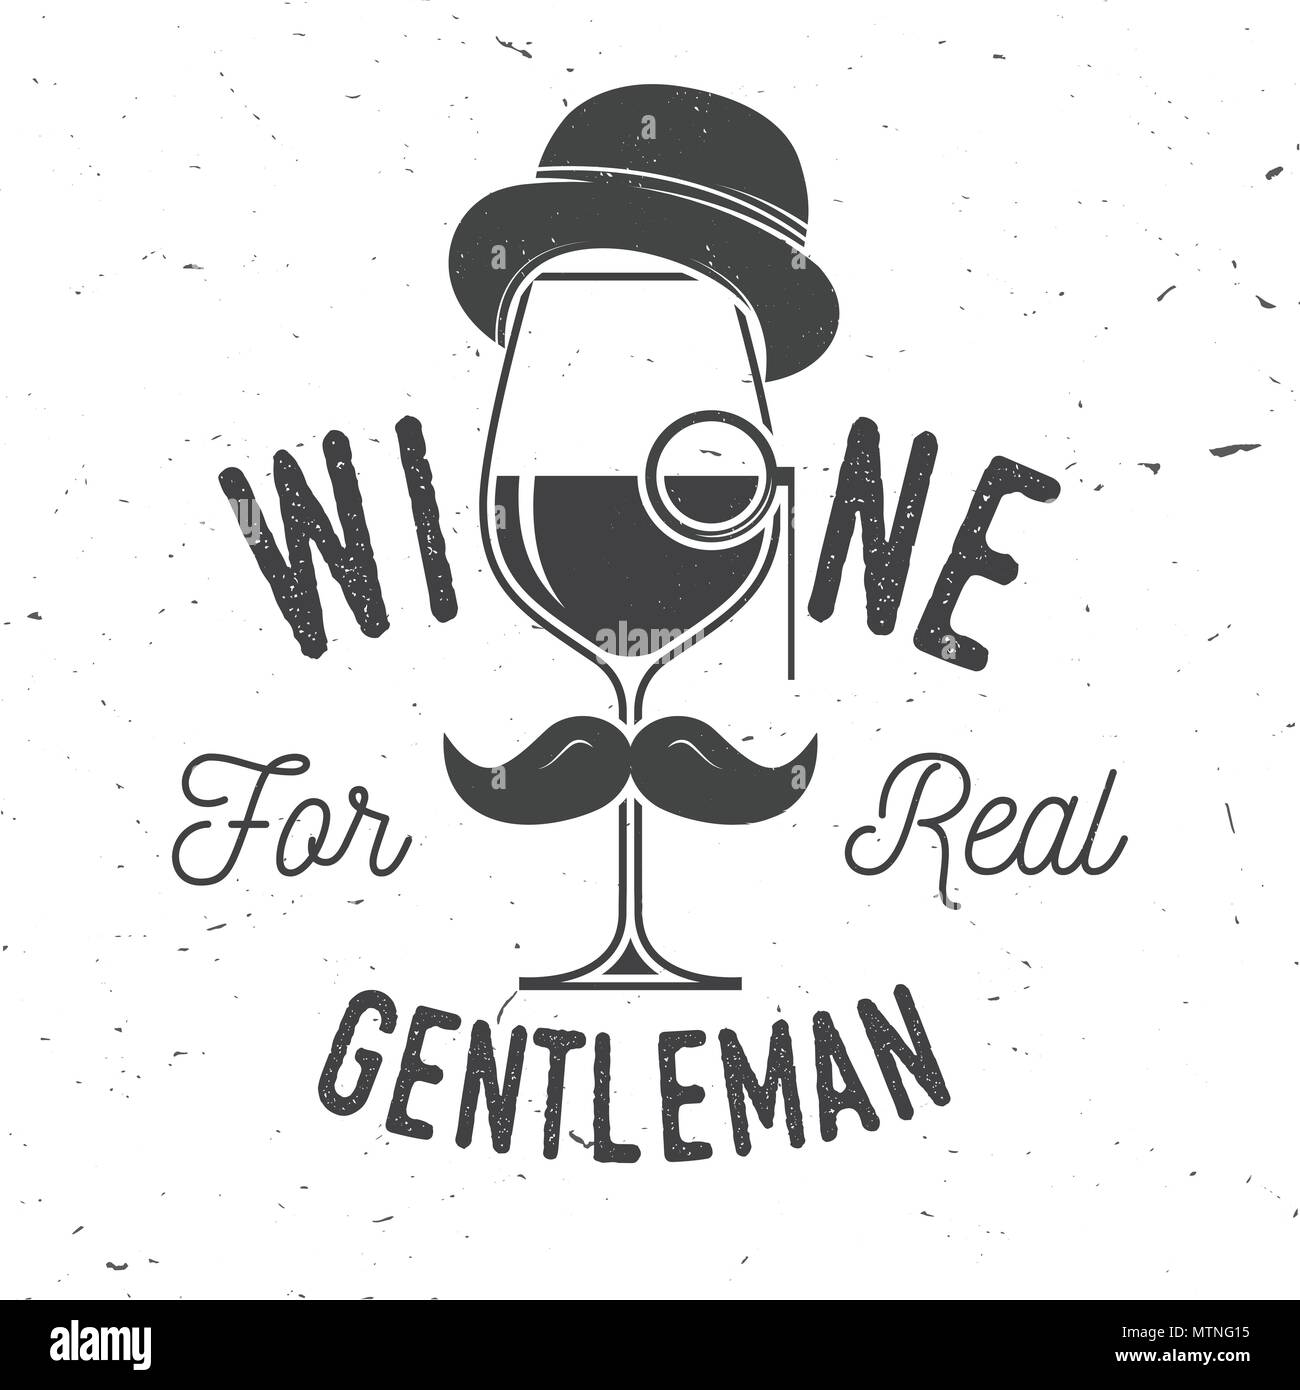 Wine for real gentleman. Winery company badge, sign or label. Vector illustration. Vintage design for bar, pub and restaurant business. Coaster for wine glasses Stock Vector